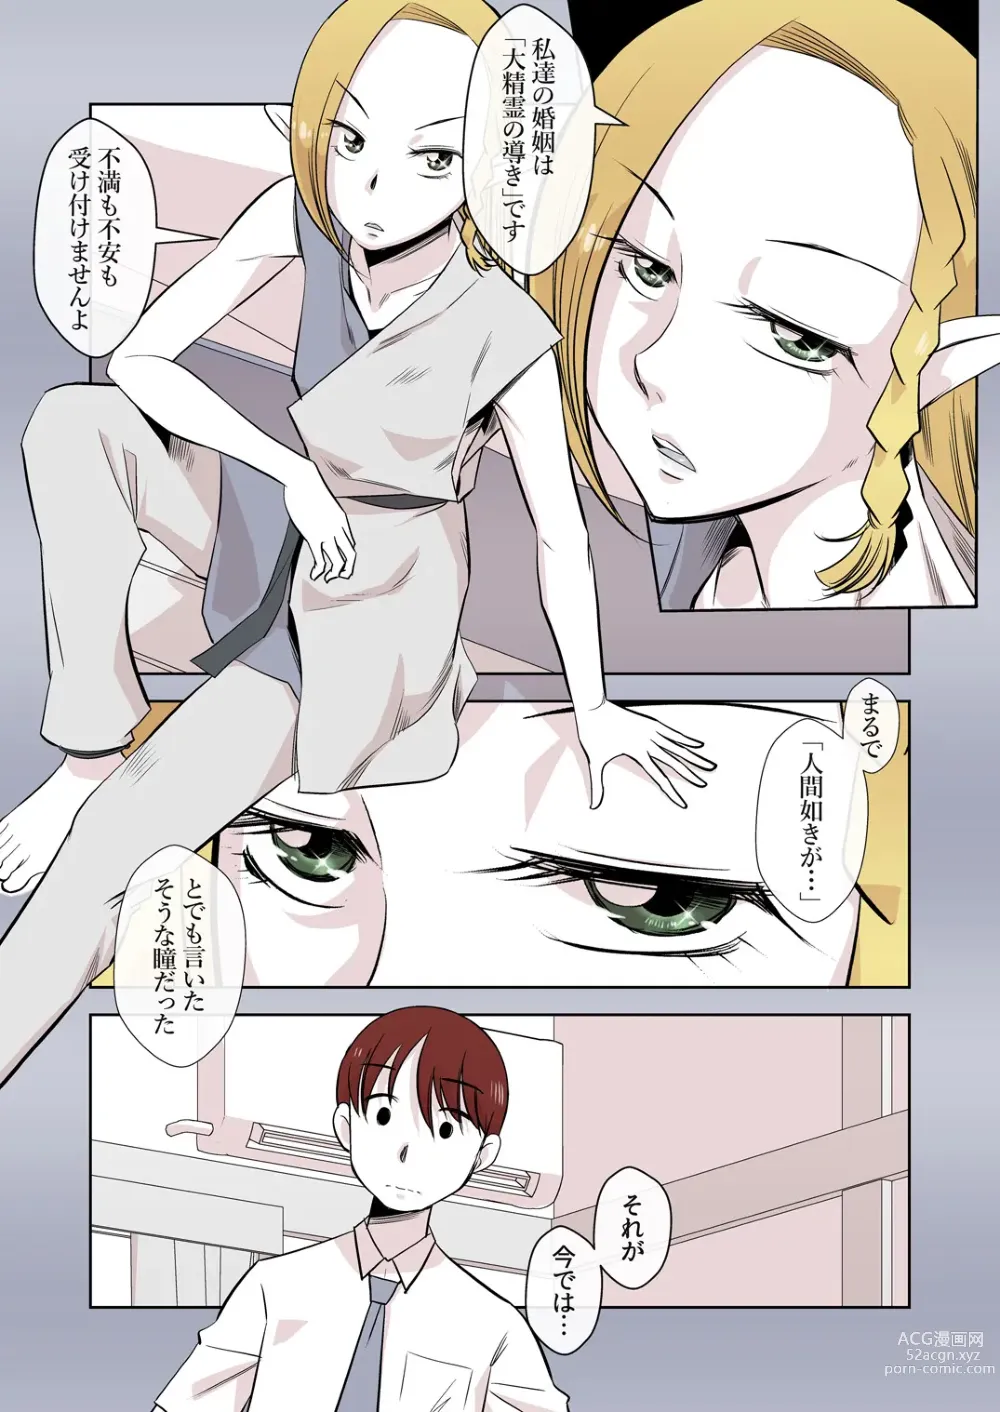 Page 11 of doujinshi My wife is elf 1